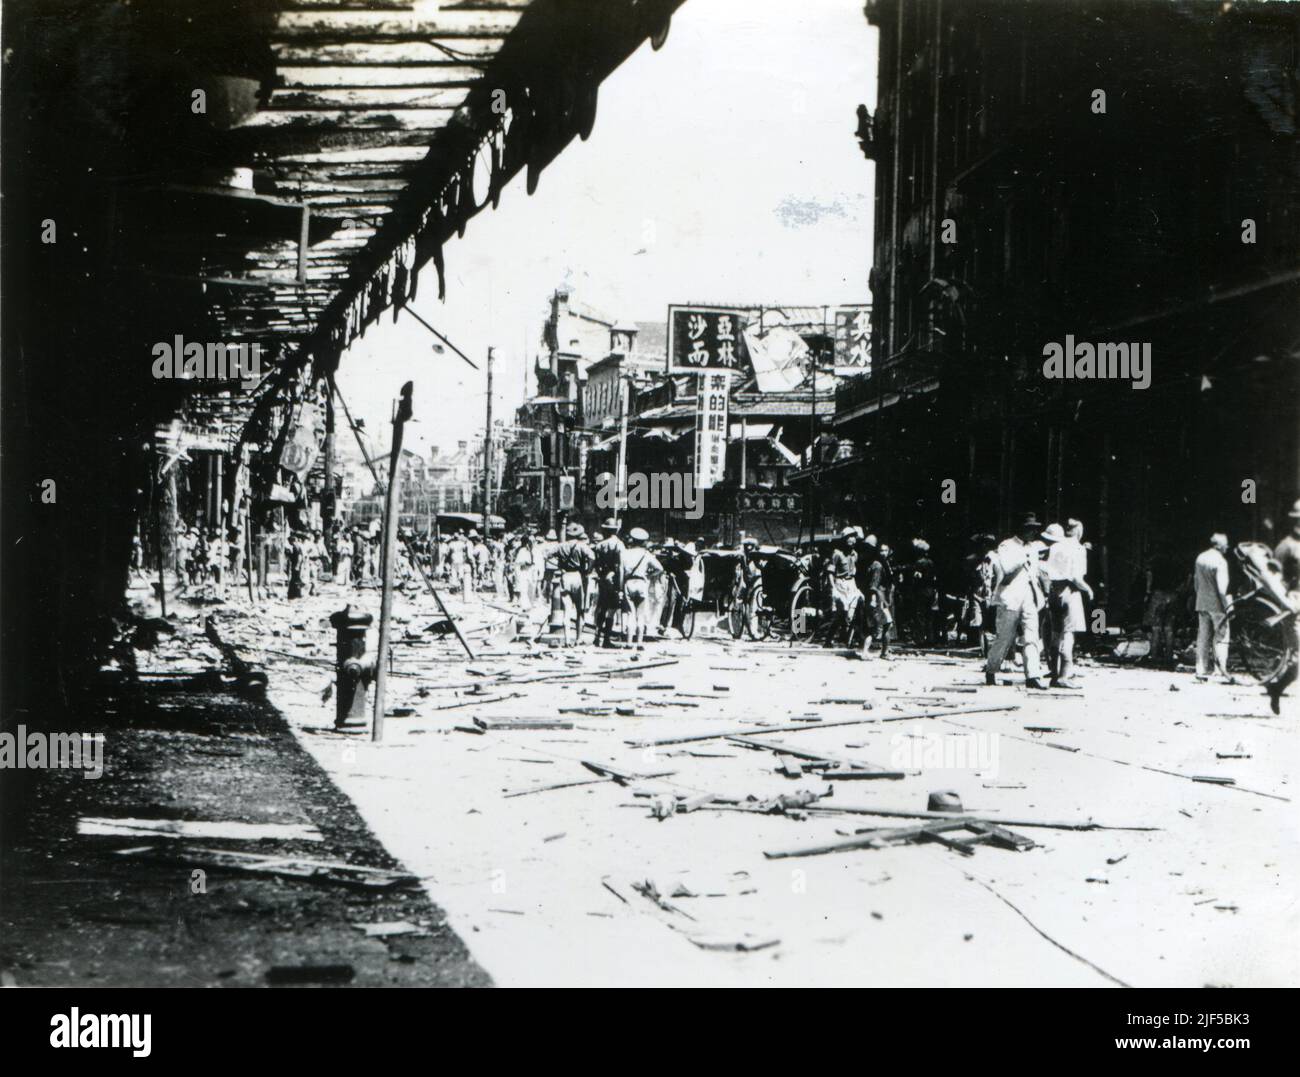 Nanking Road (Nanjing Road) after air raid during the Japanese invasion of Shanghai in 1937, showing damaged buildings and people on the street. Stock Photo